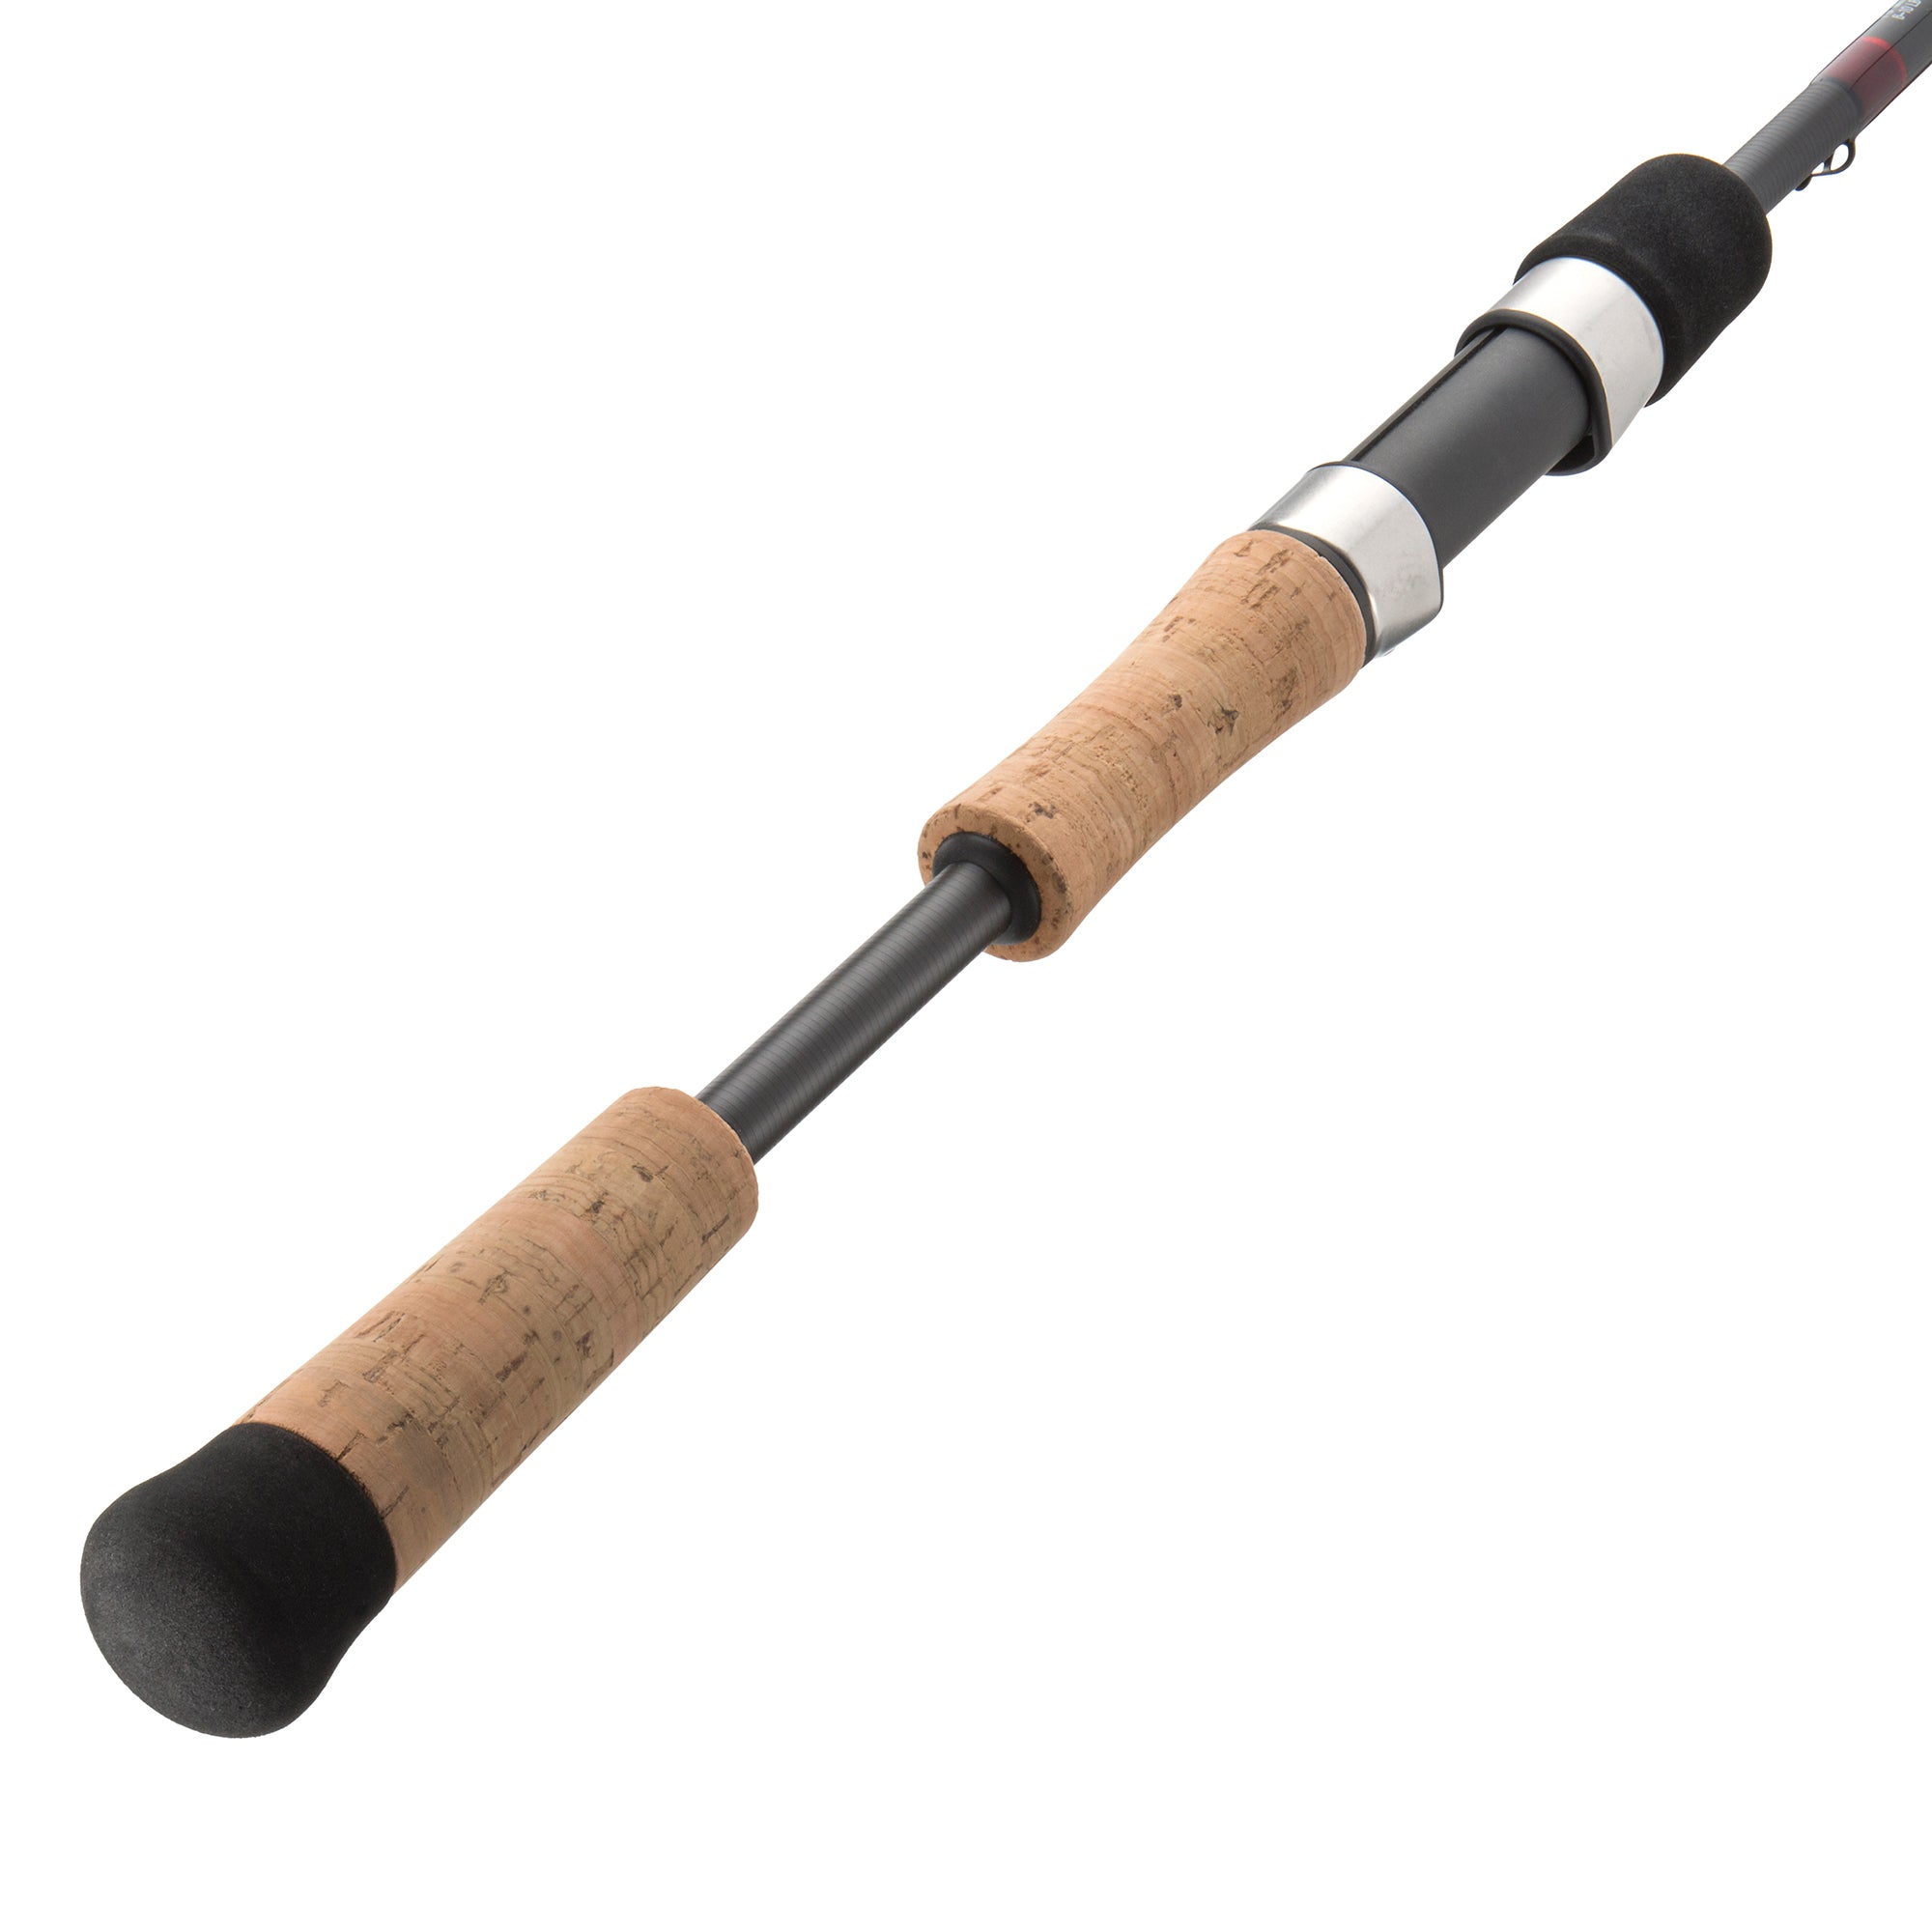 Ask the Experts: Selecting the Ideal Inshore Saltwater Fishing Rod